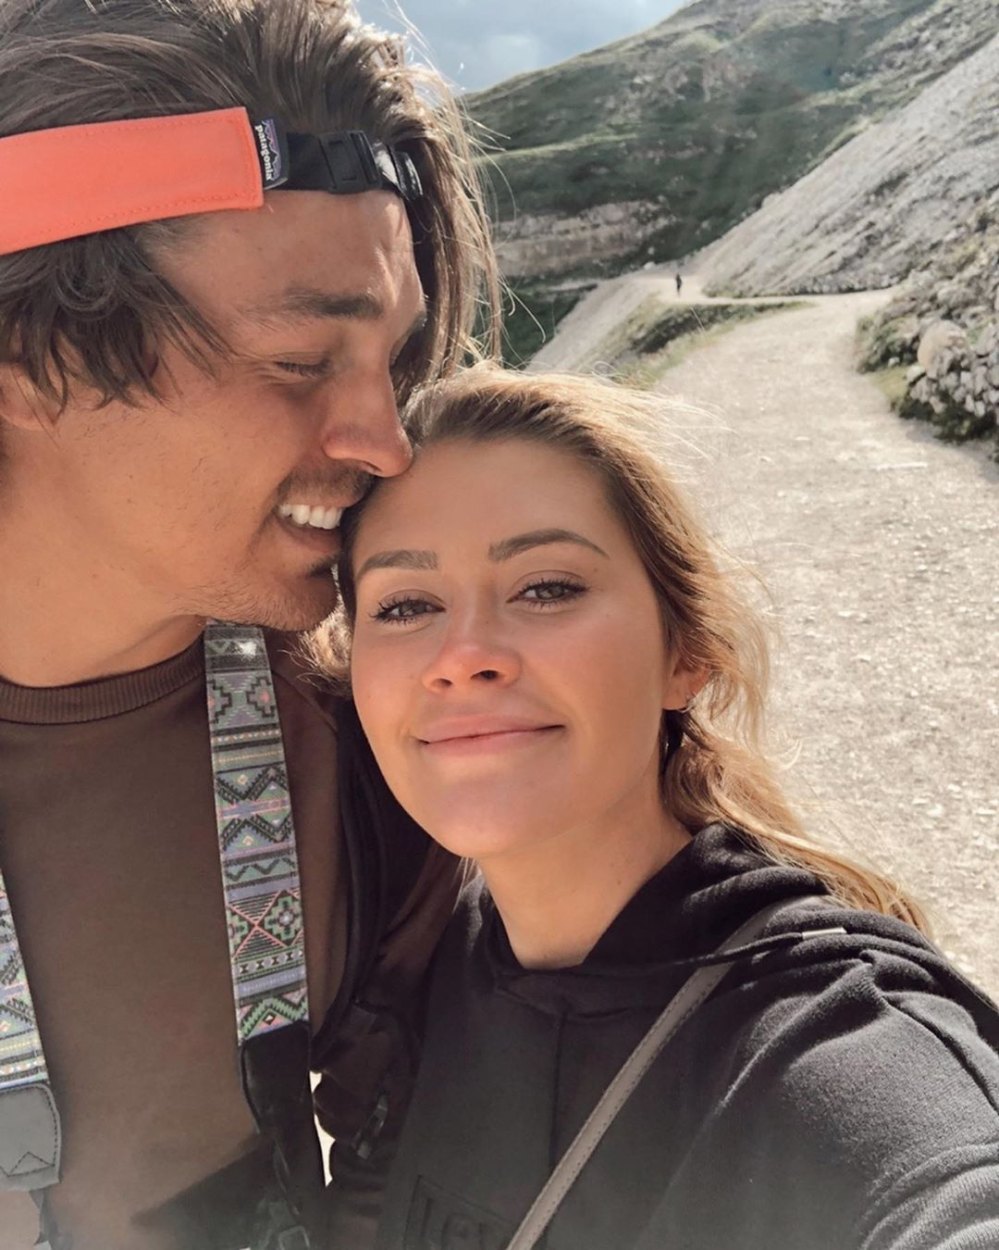 Dean Unglert Thanks Caelynn for Looking After Him After Skiing Accident